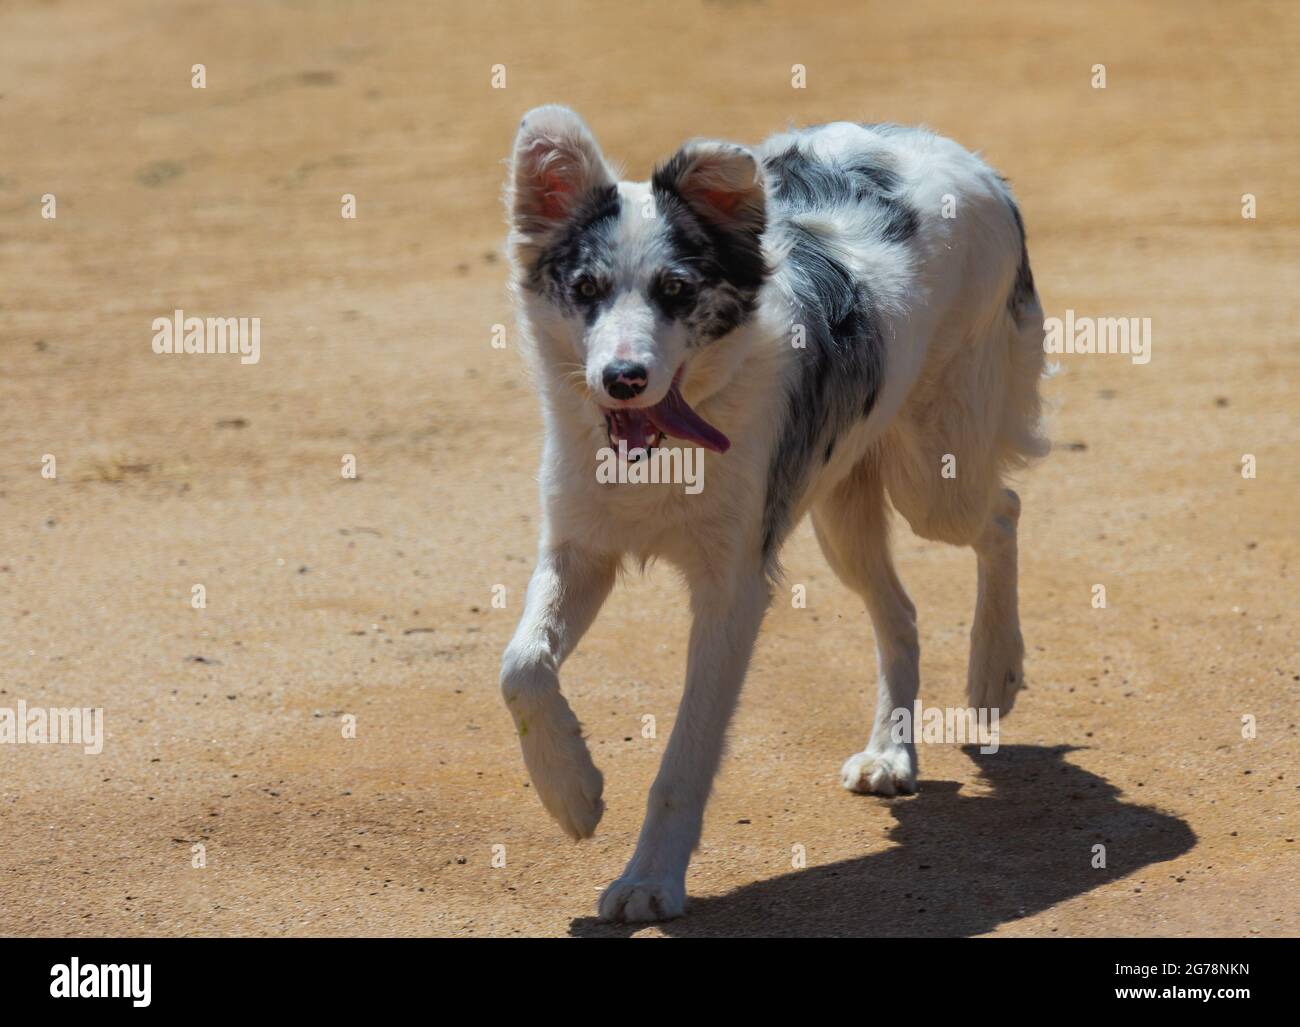 Border Collie dog walking and sneaking up with curiosity Stock Photo